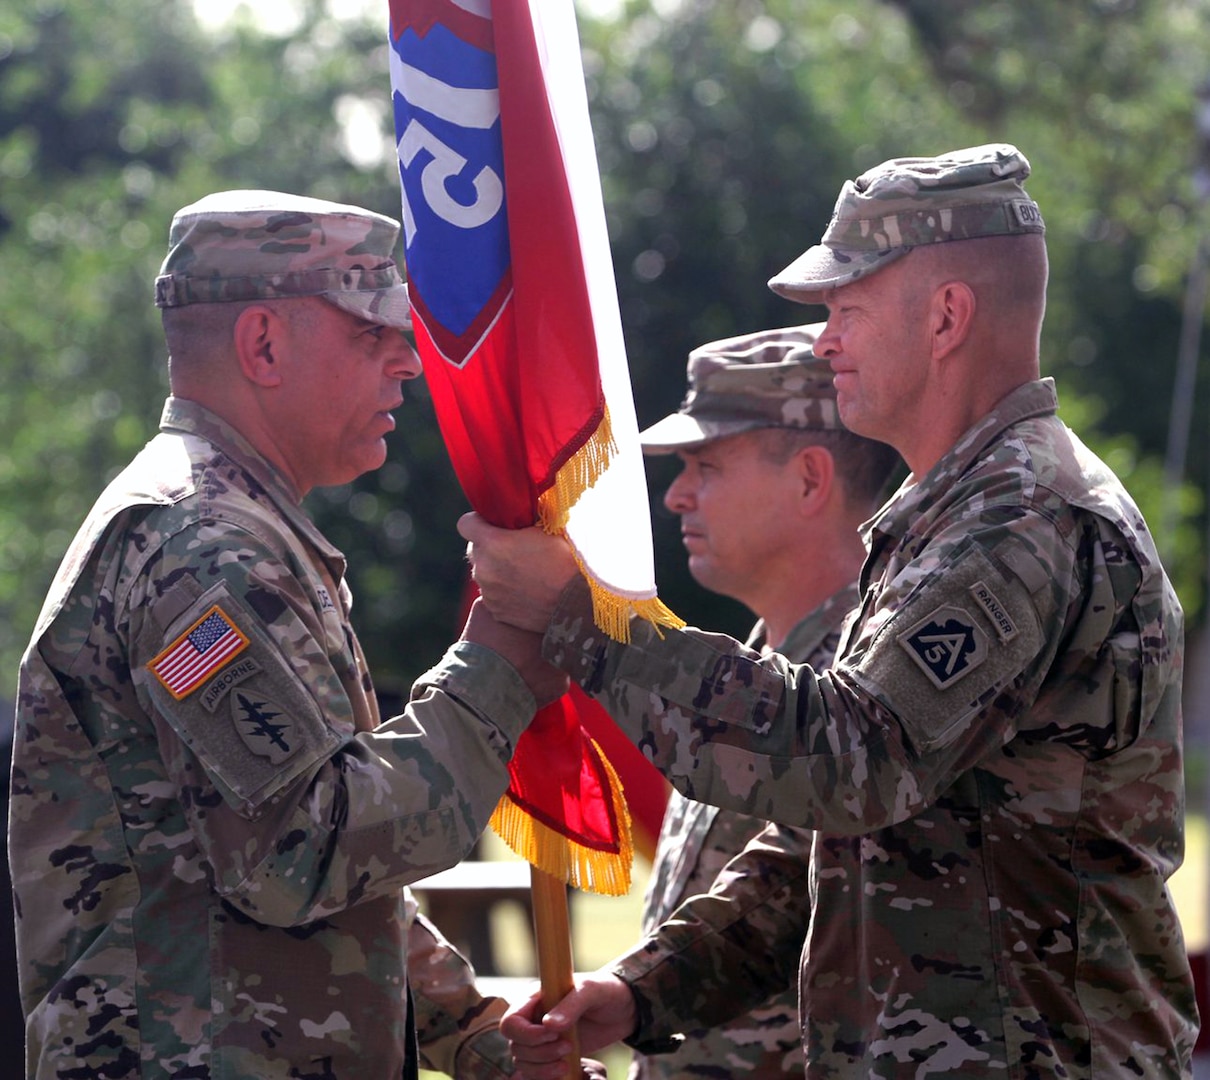 Command Sgt. Maj. Alberto Delgado (left), incoming U.S. Army North command sergeant major, receives the ARNORTH colors from Lt. Gen. Jeffrey Buchanan, commanding general, ARNORTH, during a change of responsibility ceremony at the Quadrangle at Joint Base San Antonio-Fort Sam Houston June 8.